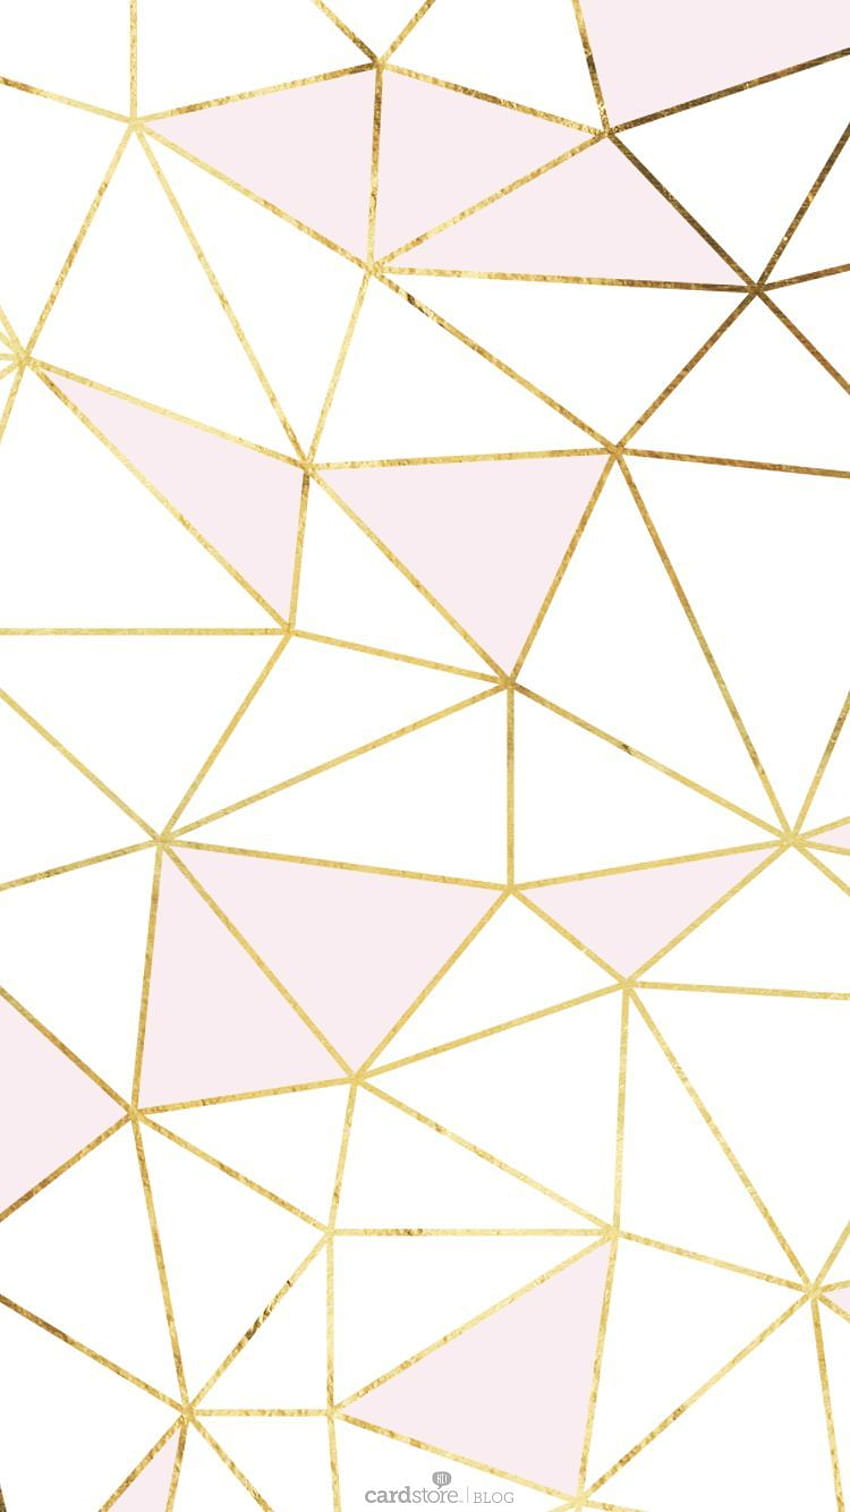 Indoor White And Golden PVC Geometric Wallpaper Sheet